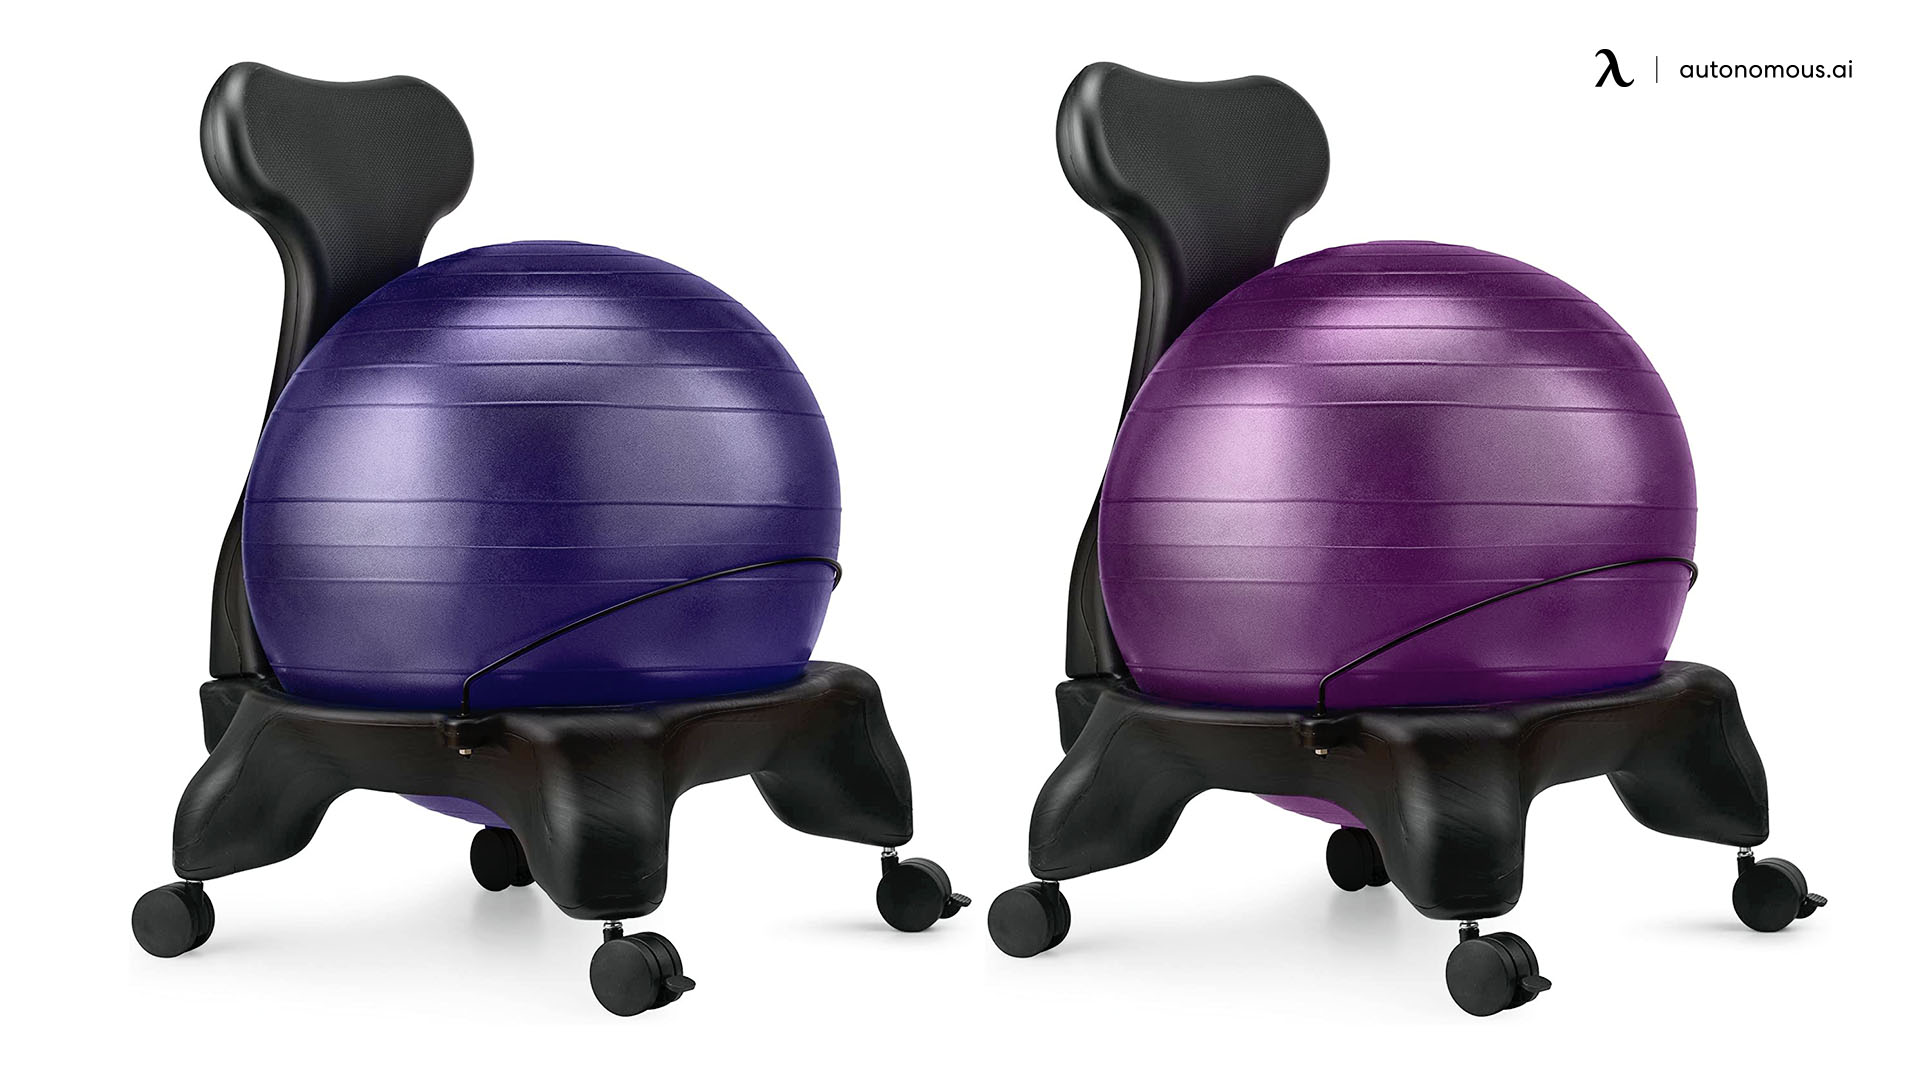 LuxFit Premium Fitness Exercise Ball Chair 